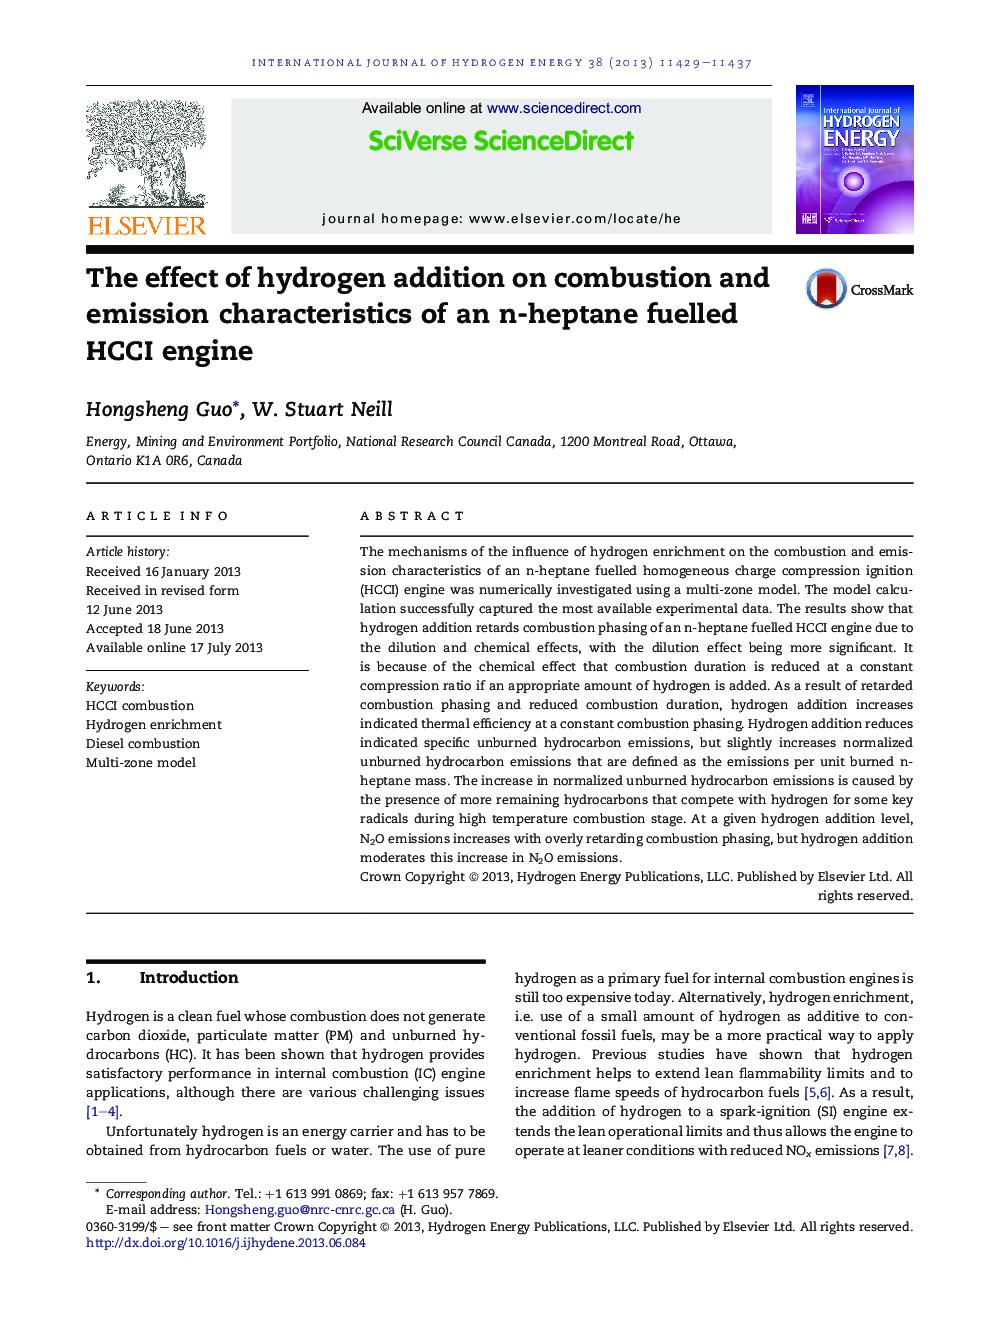 The effect of hydrogen addition on combustion and emission characteristics of an n-heptane fuelled HCCI engine